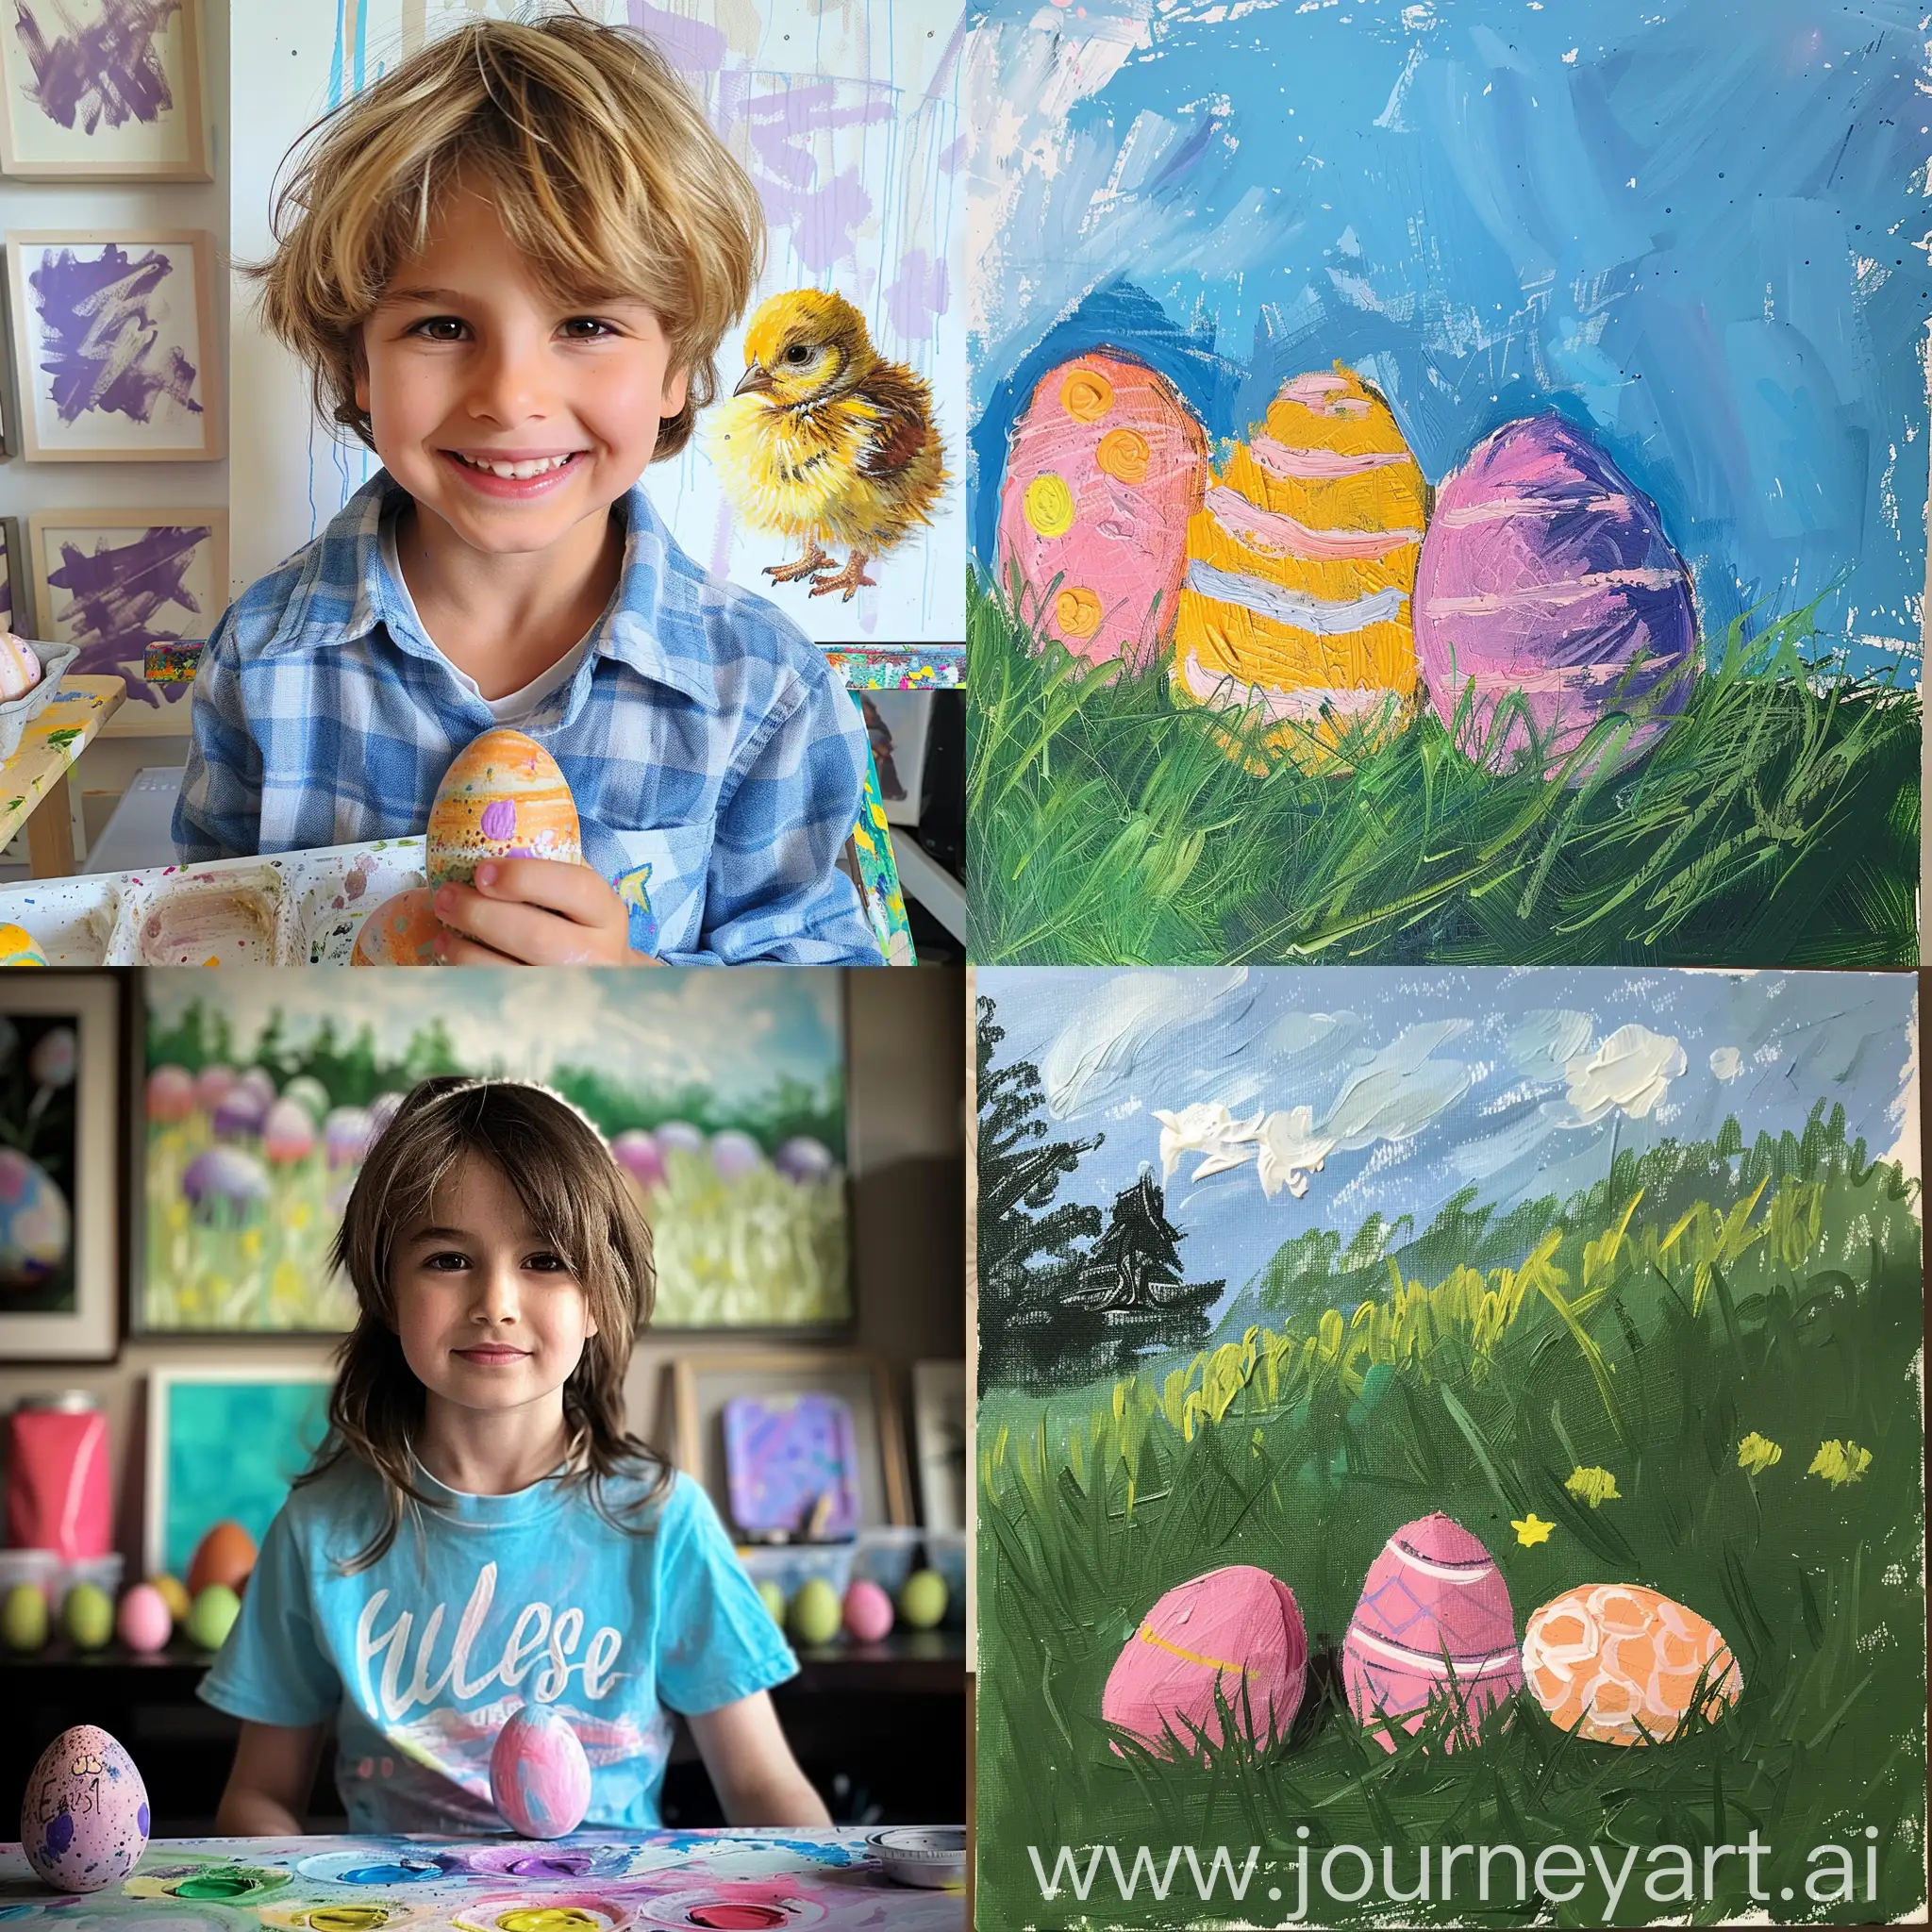 Colorful-Easter-Egg-Painting-by-a-10YearOld-Artist